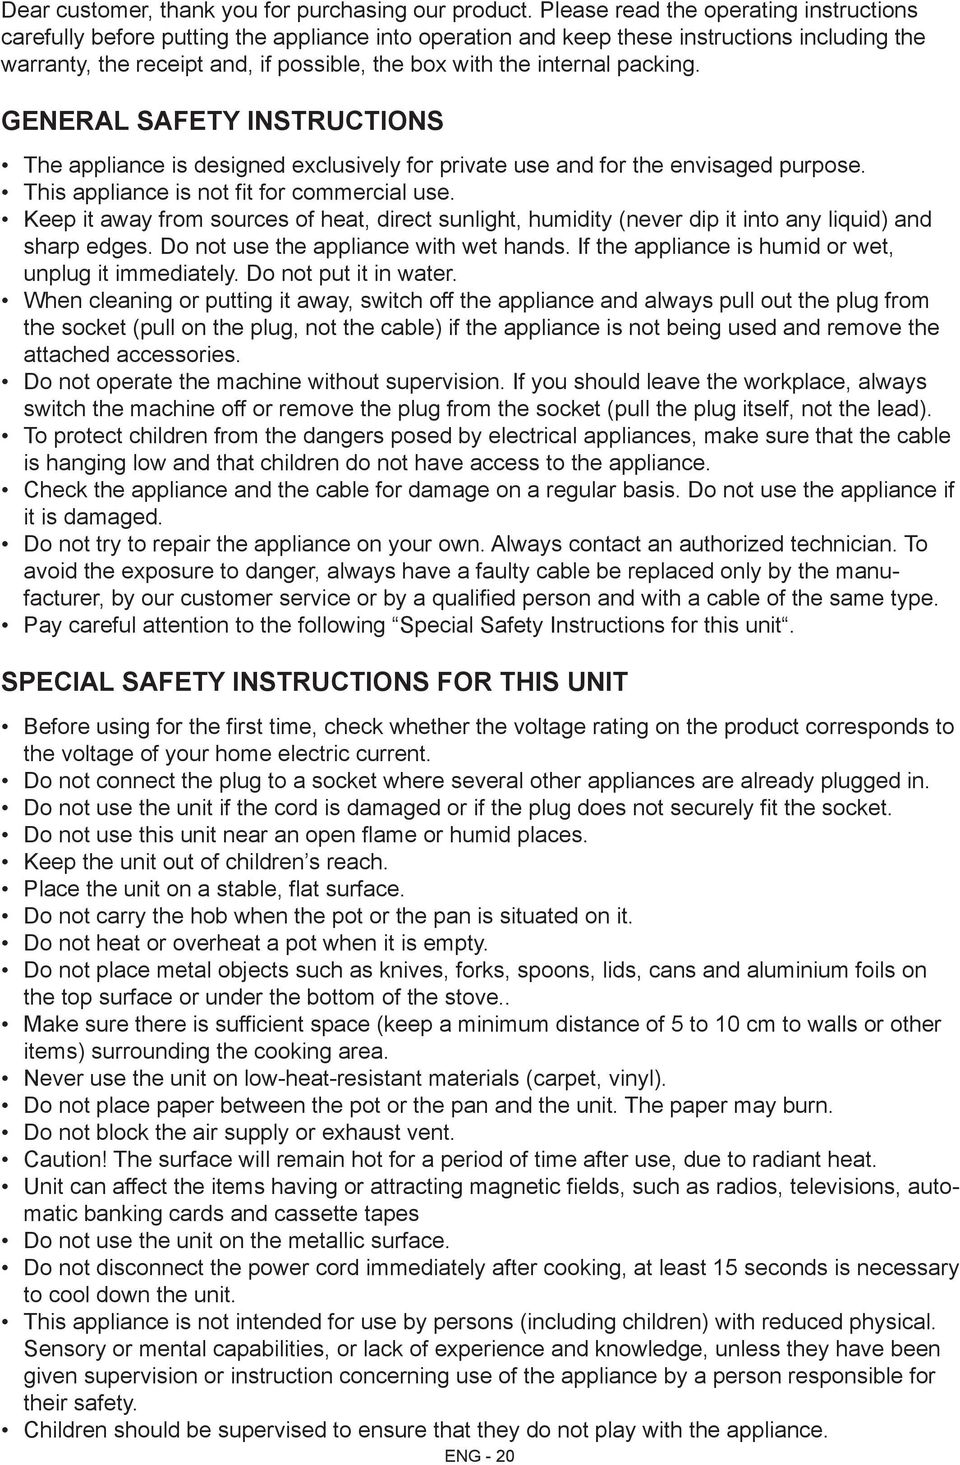 internal packing. General Safety Instructions The appliance is designed exclusively for private use and for the envisaged purpose. This appliance is not fit for commercial use.